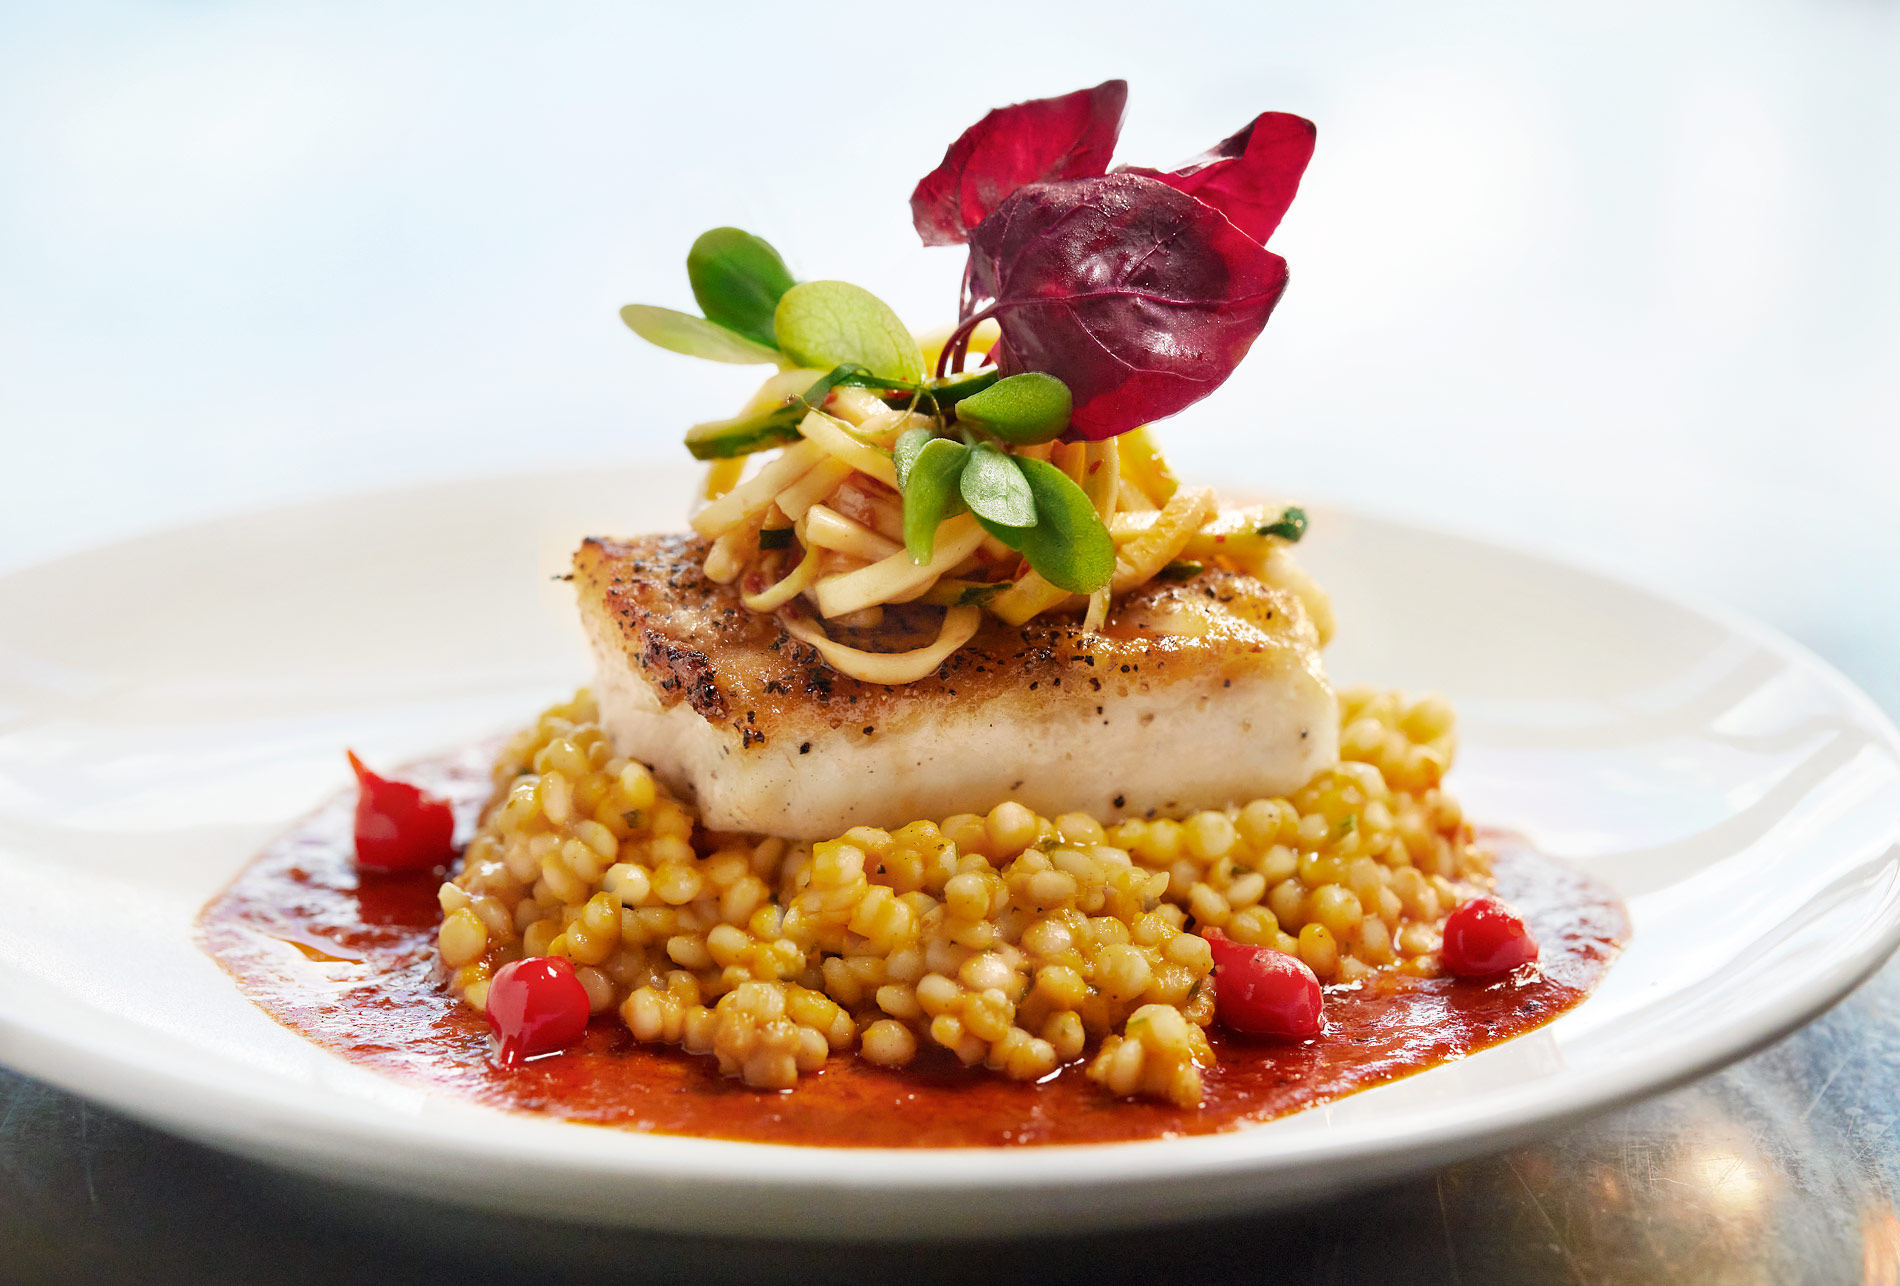 Wild Alaskan Halibut with toasted butternut squash and Israeli couscous in achiote pineapple broth